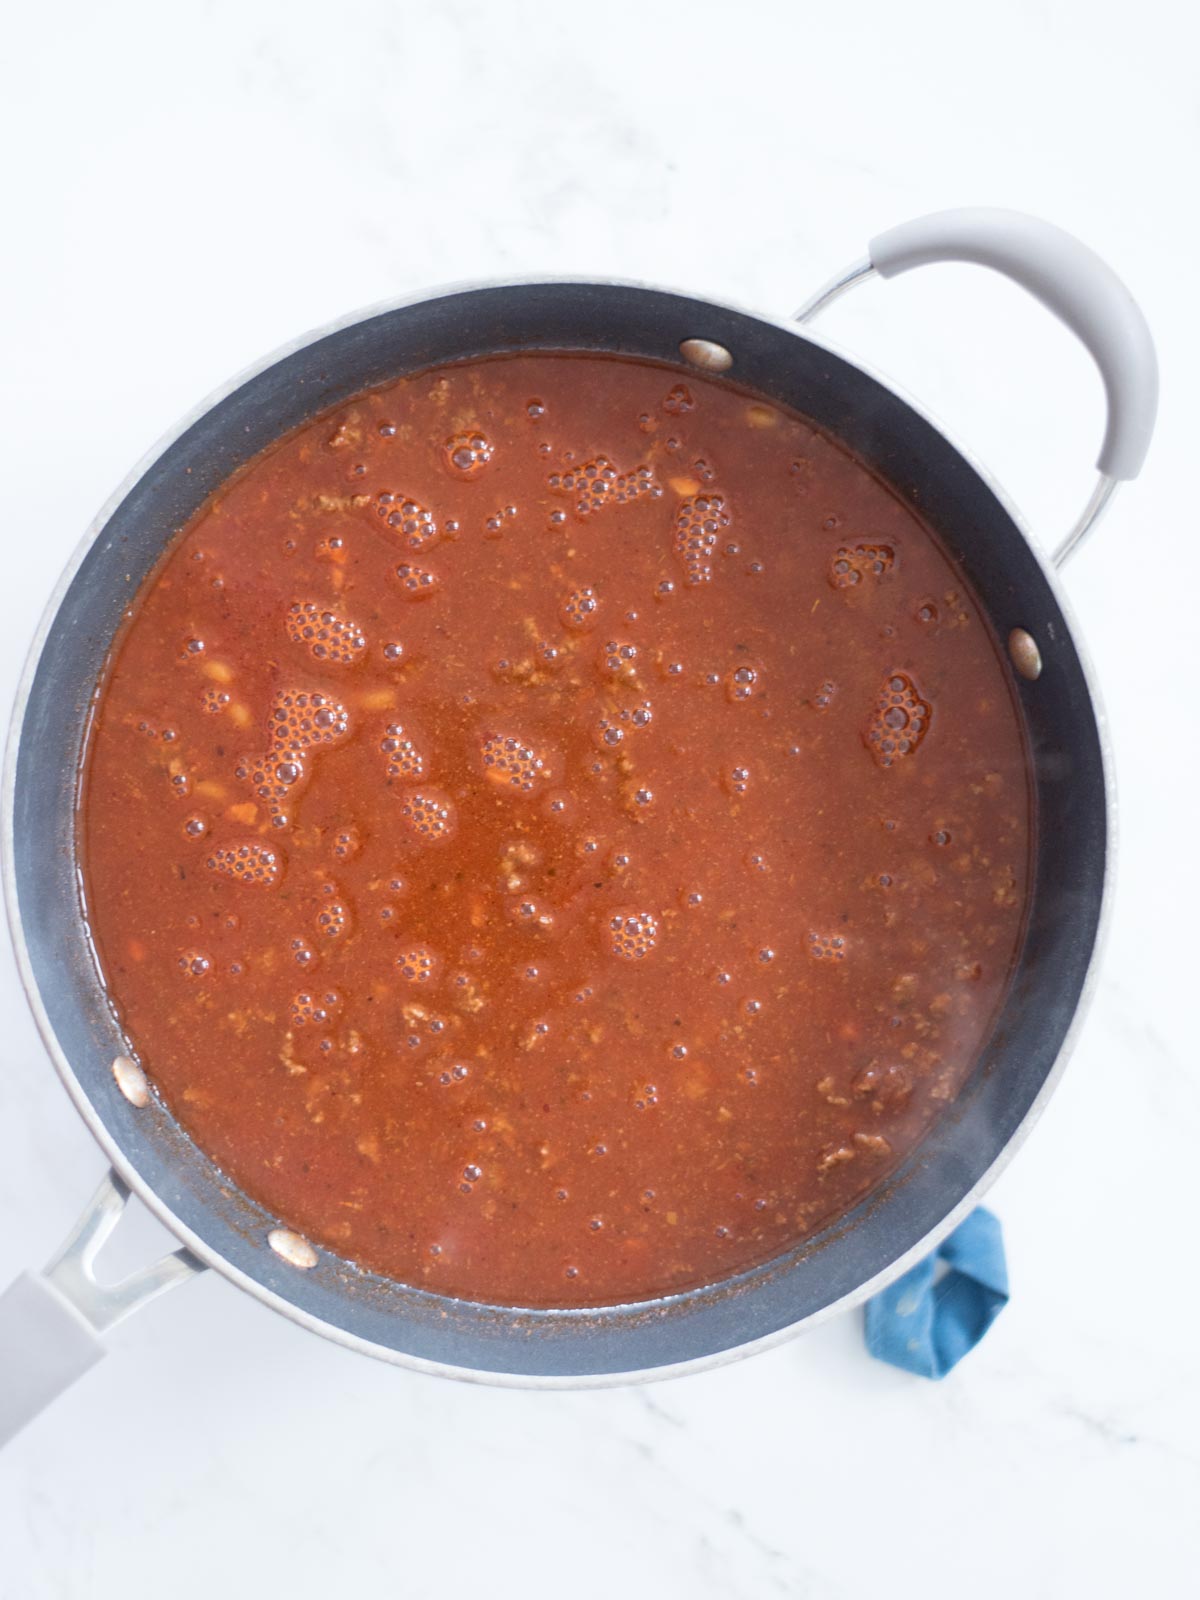 enchilada sauce, beef broth, and tomato sauce added to skillet with ground beef